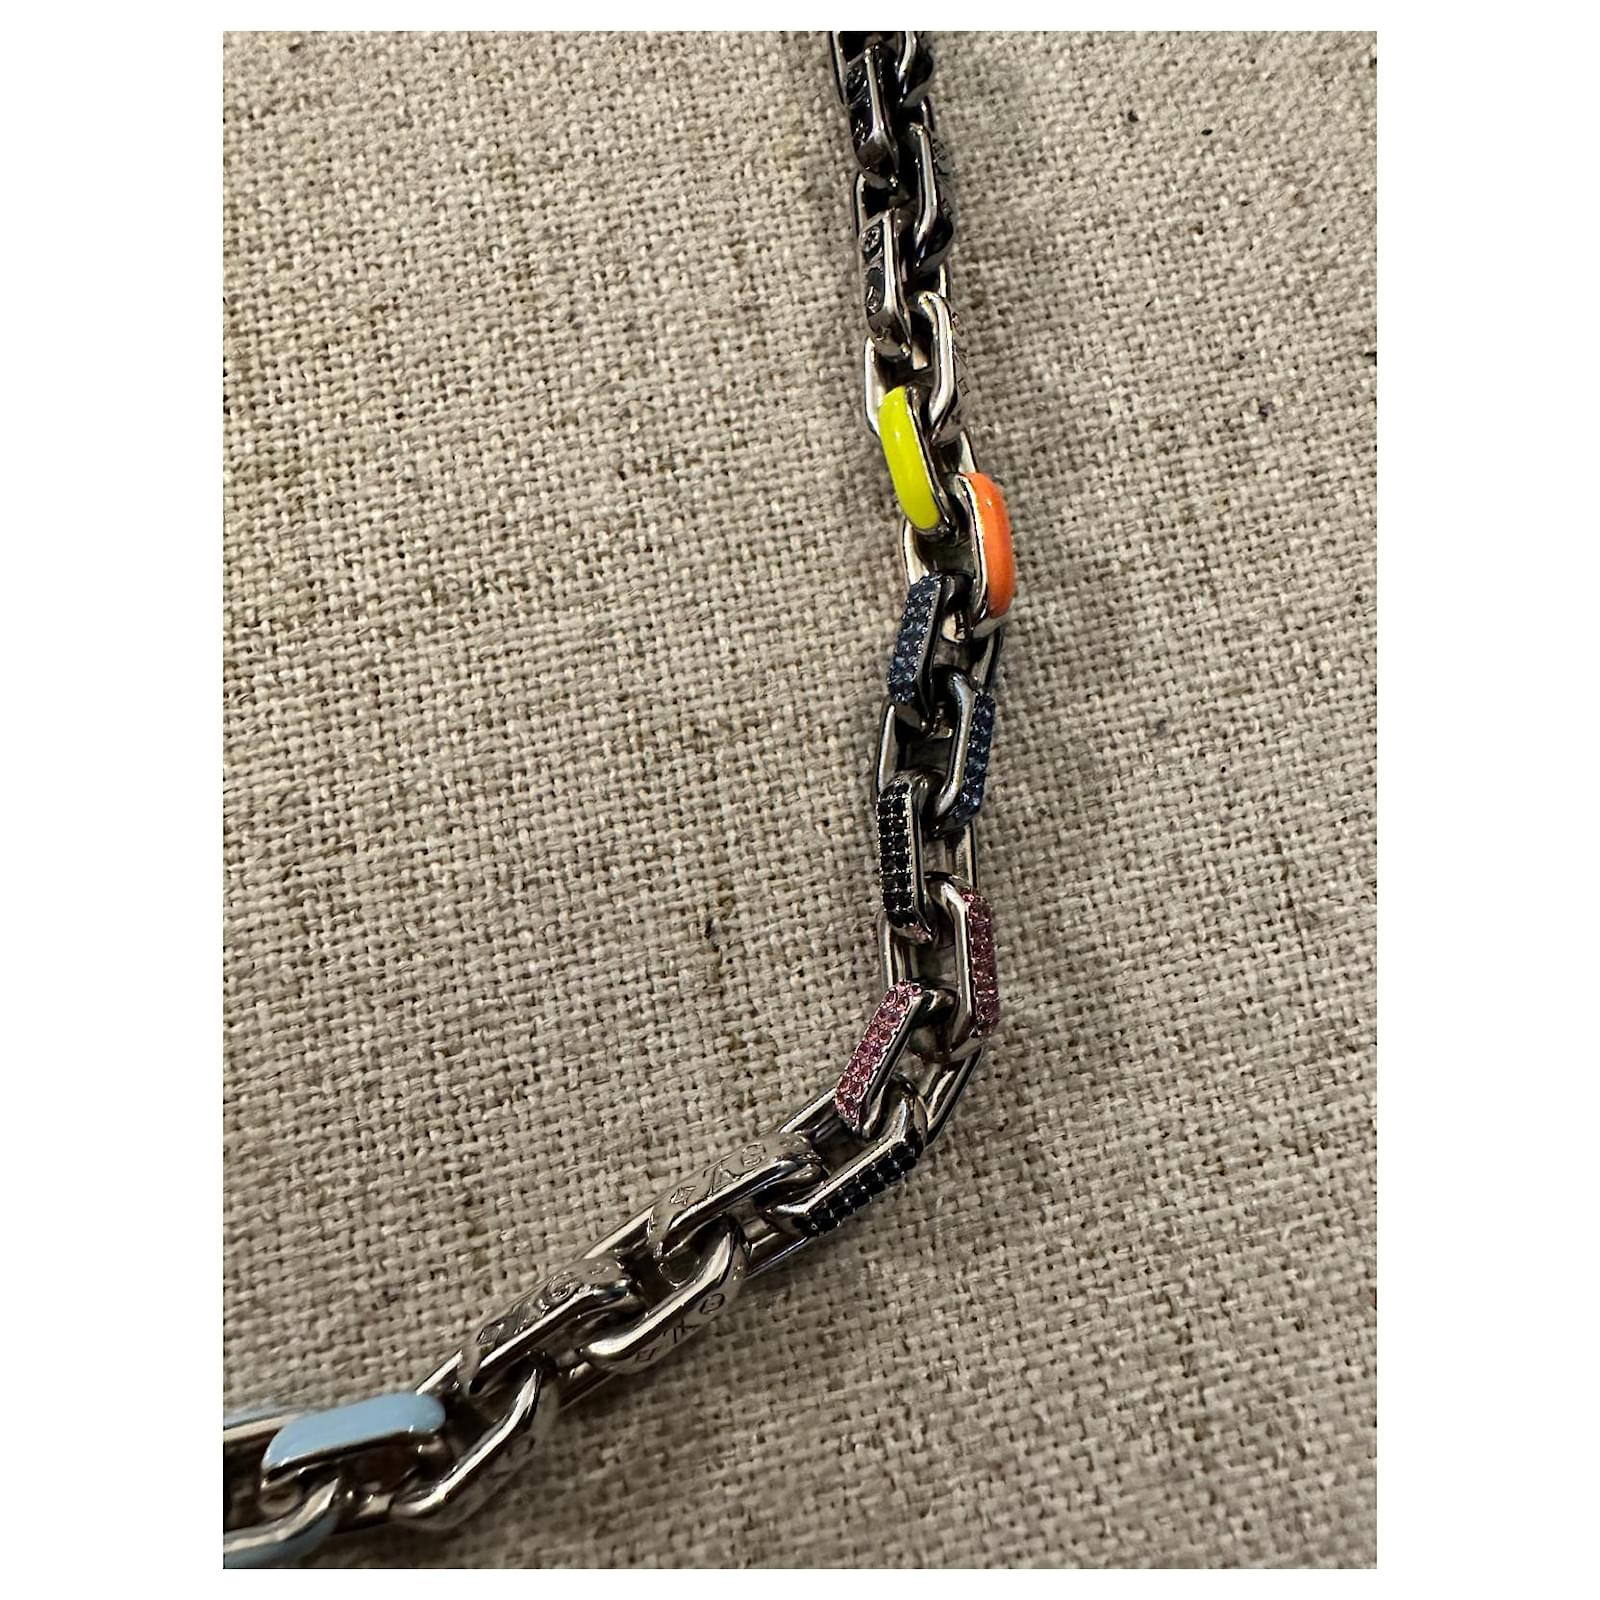 Louis Vuitton Paradise Chain Necklace M00924 Multicolor in  Metal/Crystal/Enamel with Silver-tone - US